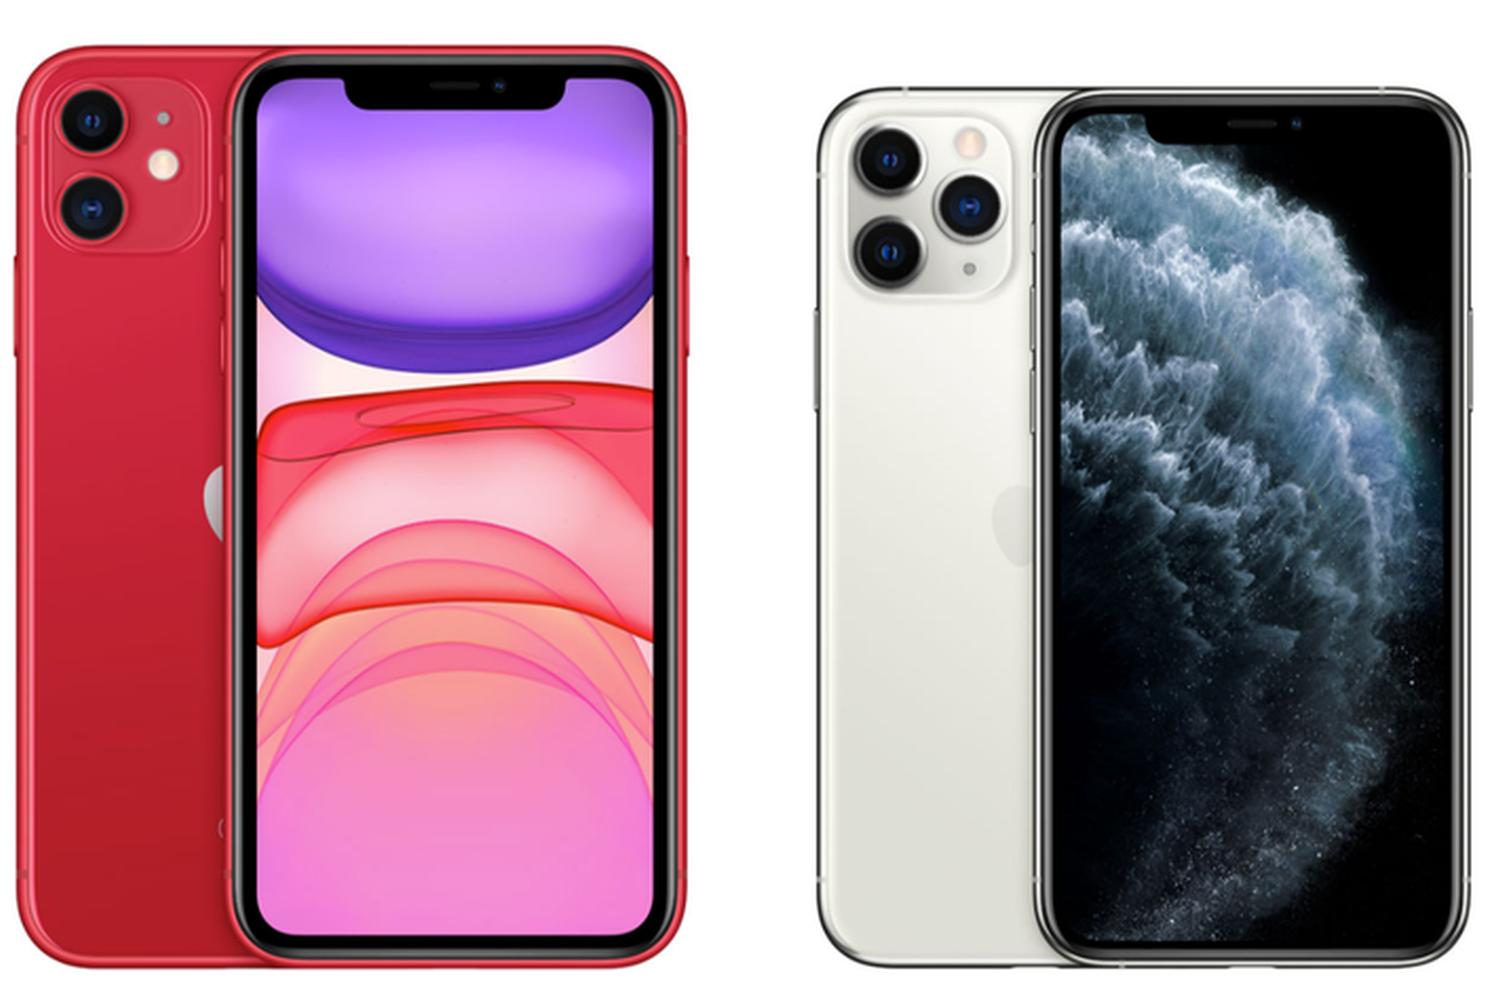 Iphone - Iphone 11 Pro And Iphone 11 Difference - HD Wallpaper 